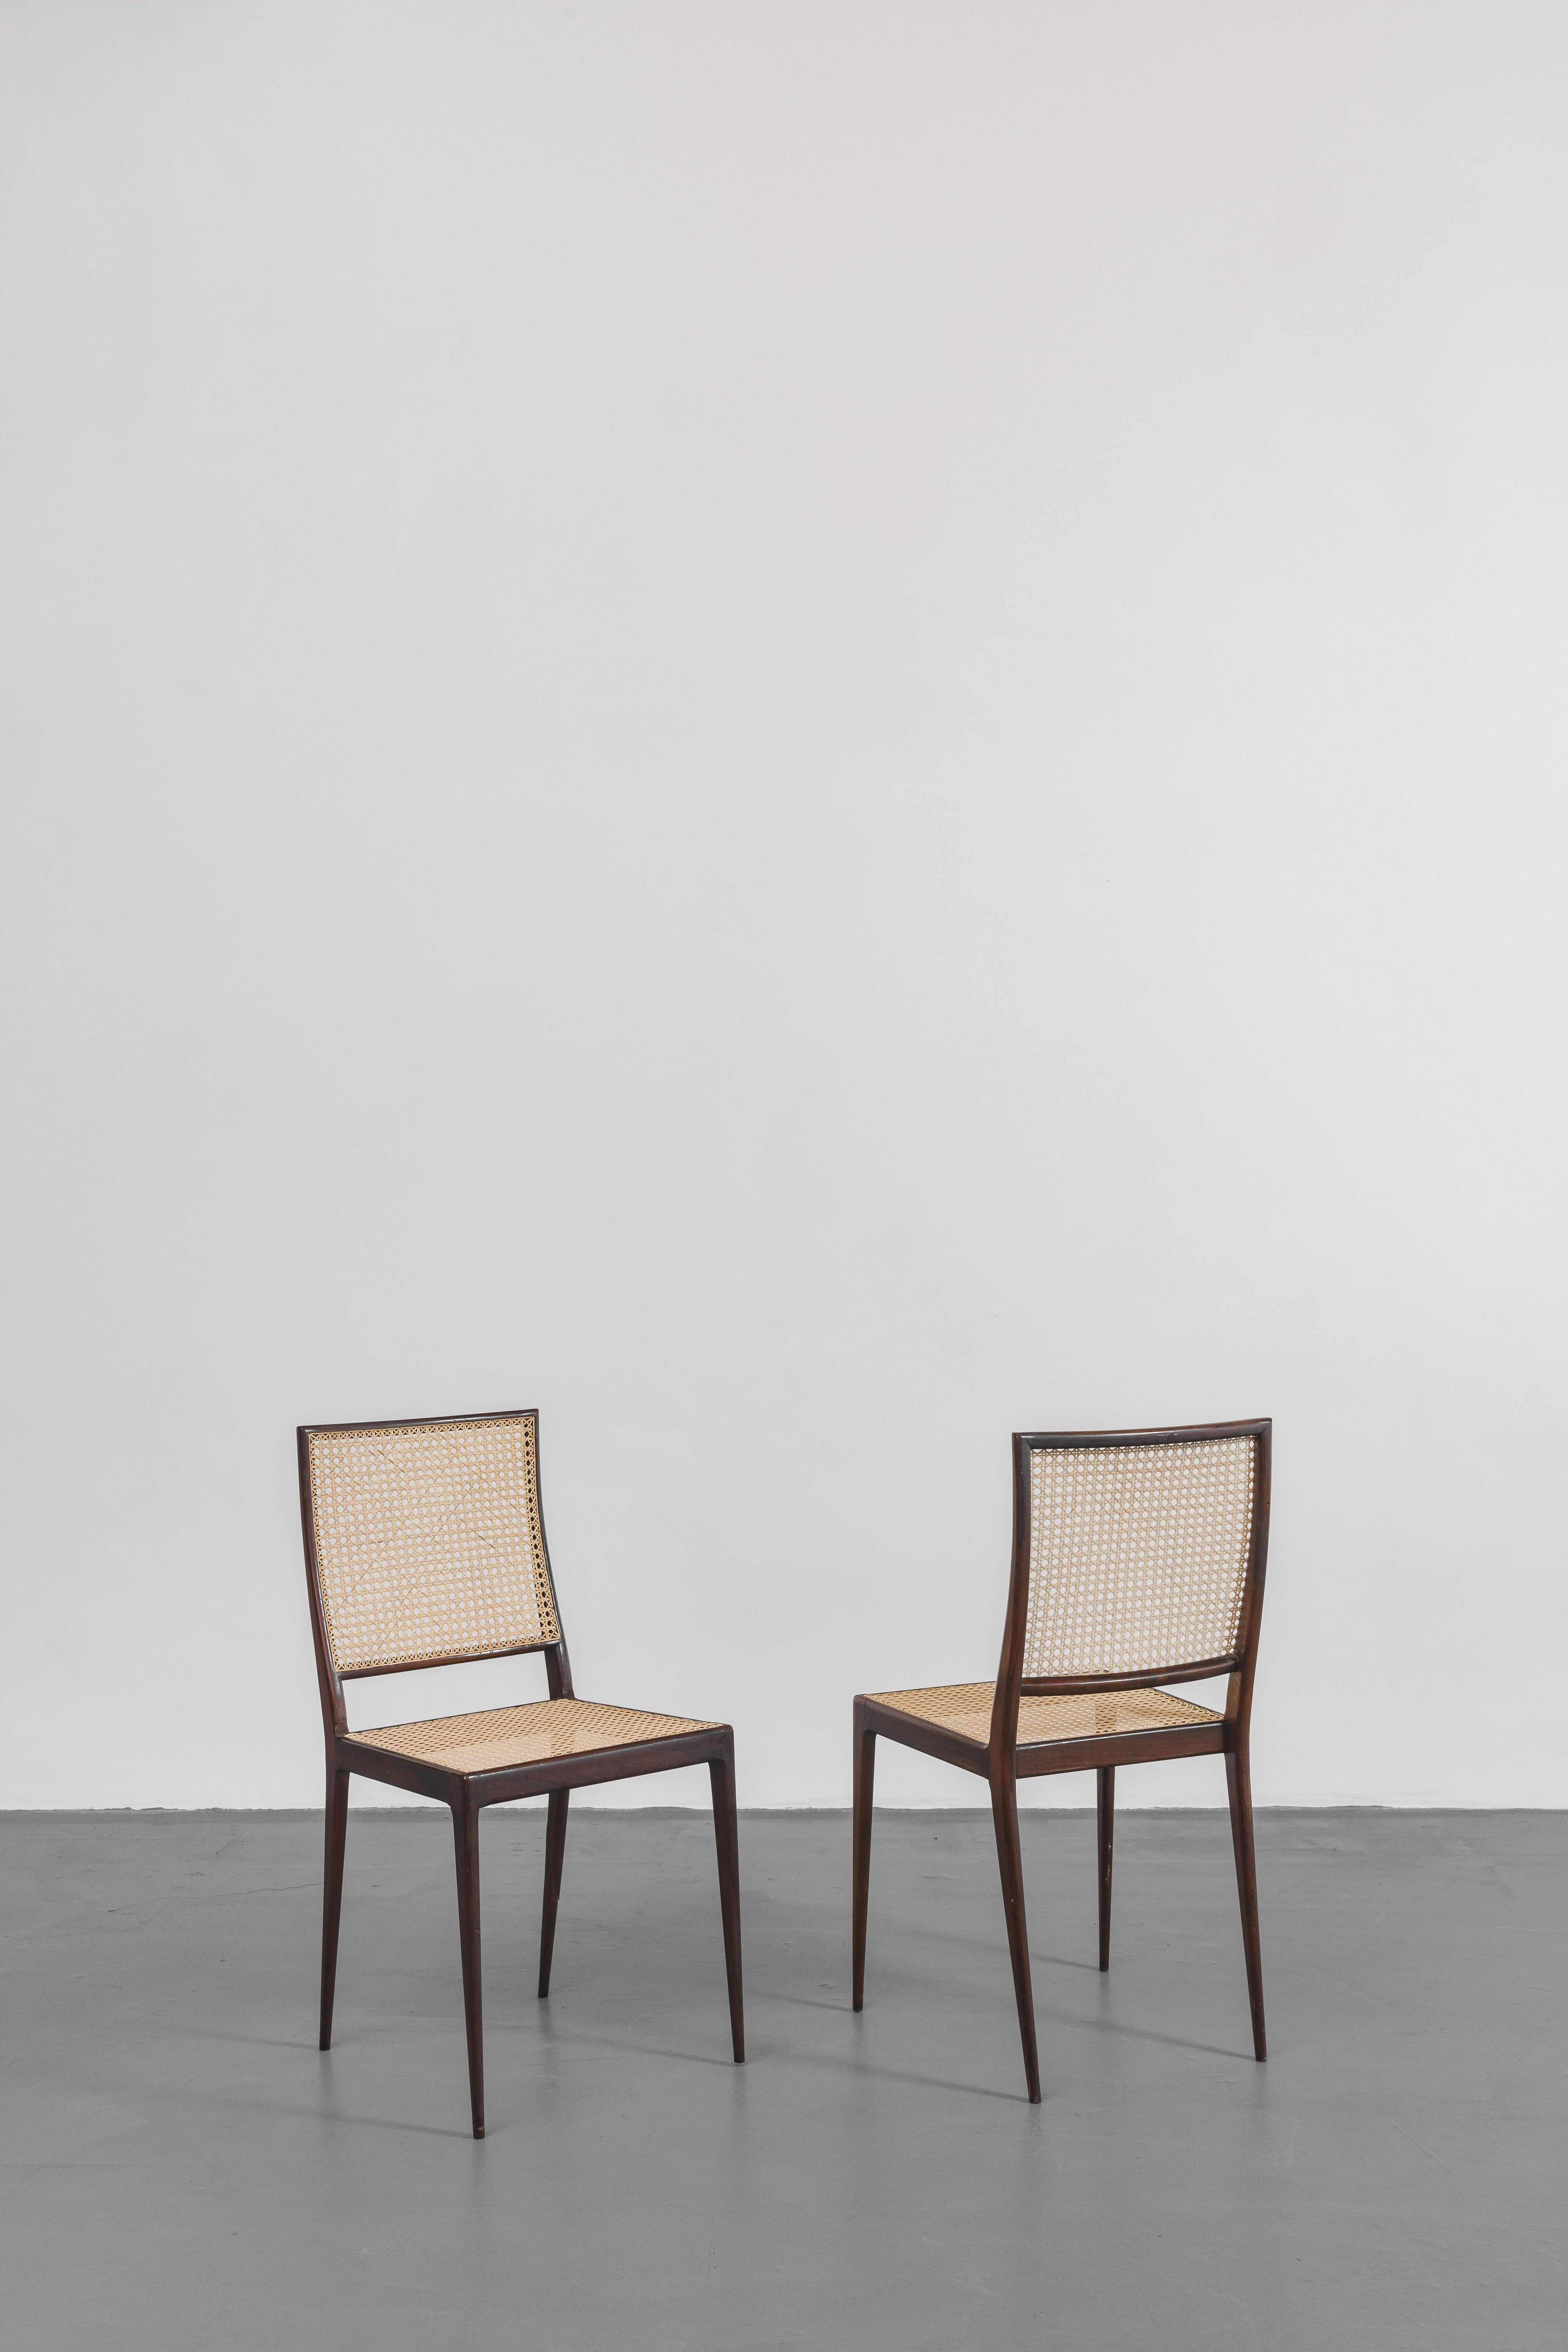 This incredible set of six chairs designed by Geraldo de Barros (1923-1998) and manufactured by Unilabor has a frame in solid rosewood with cane backrests and seats. Because it is a less dense material, the delicate cane weave for furniture gives